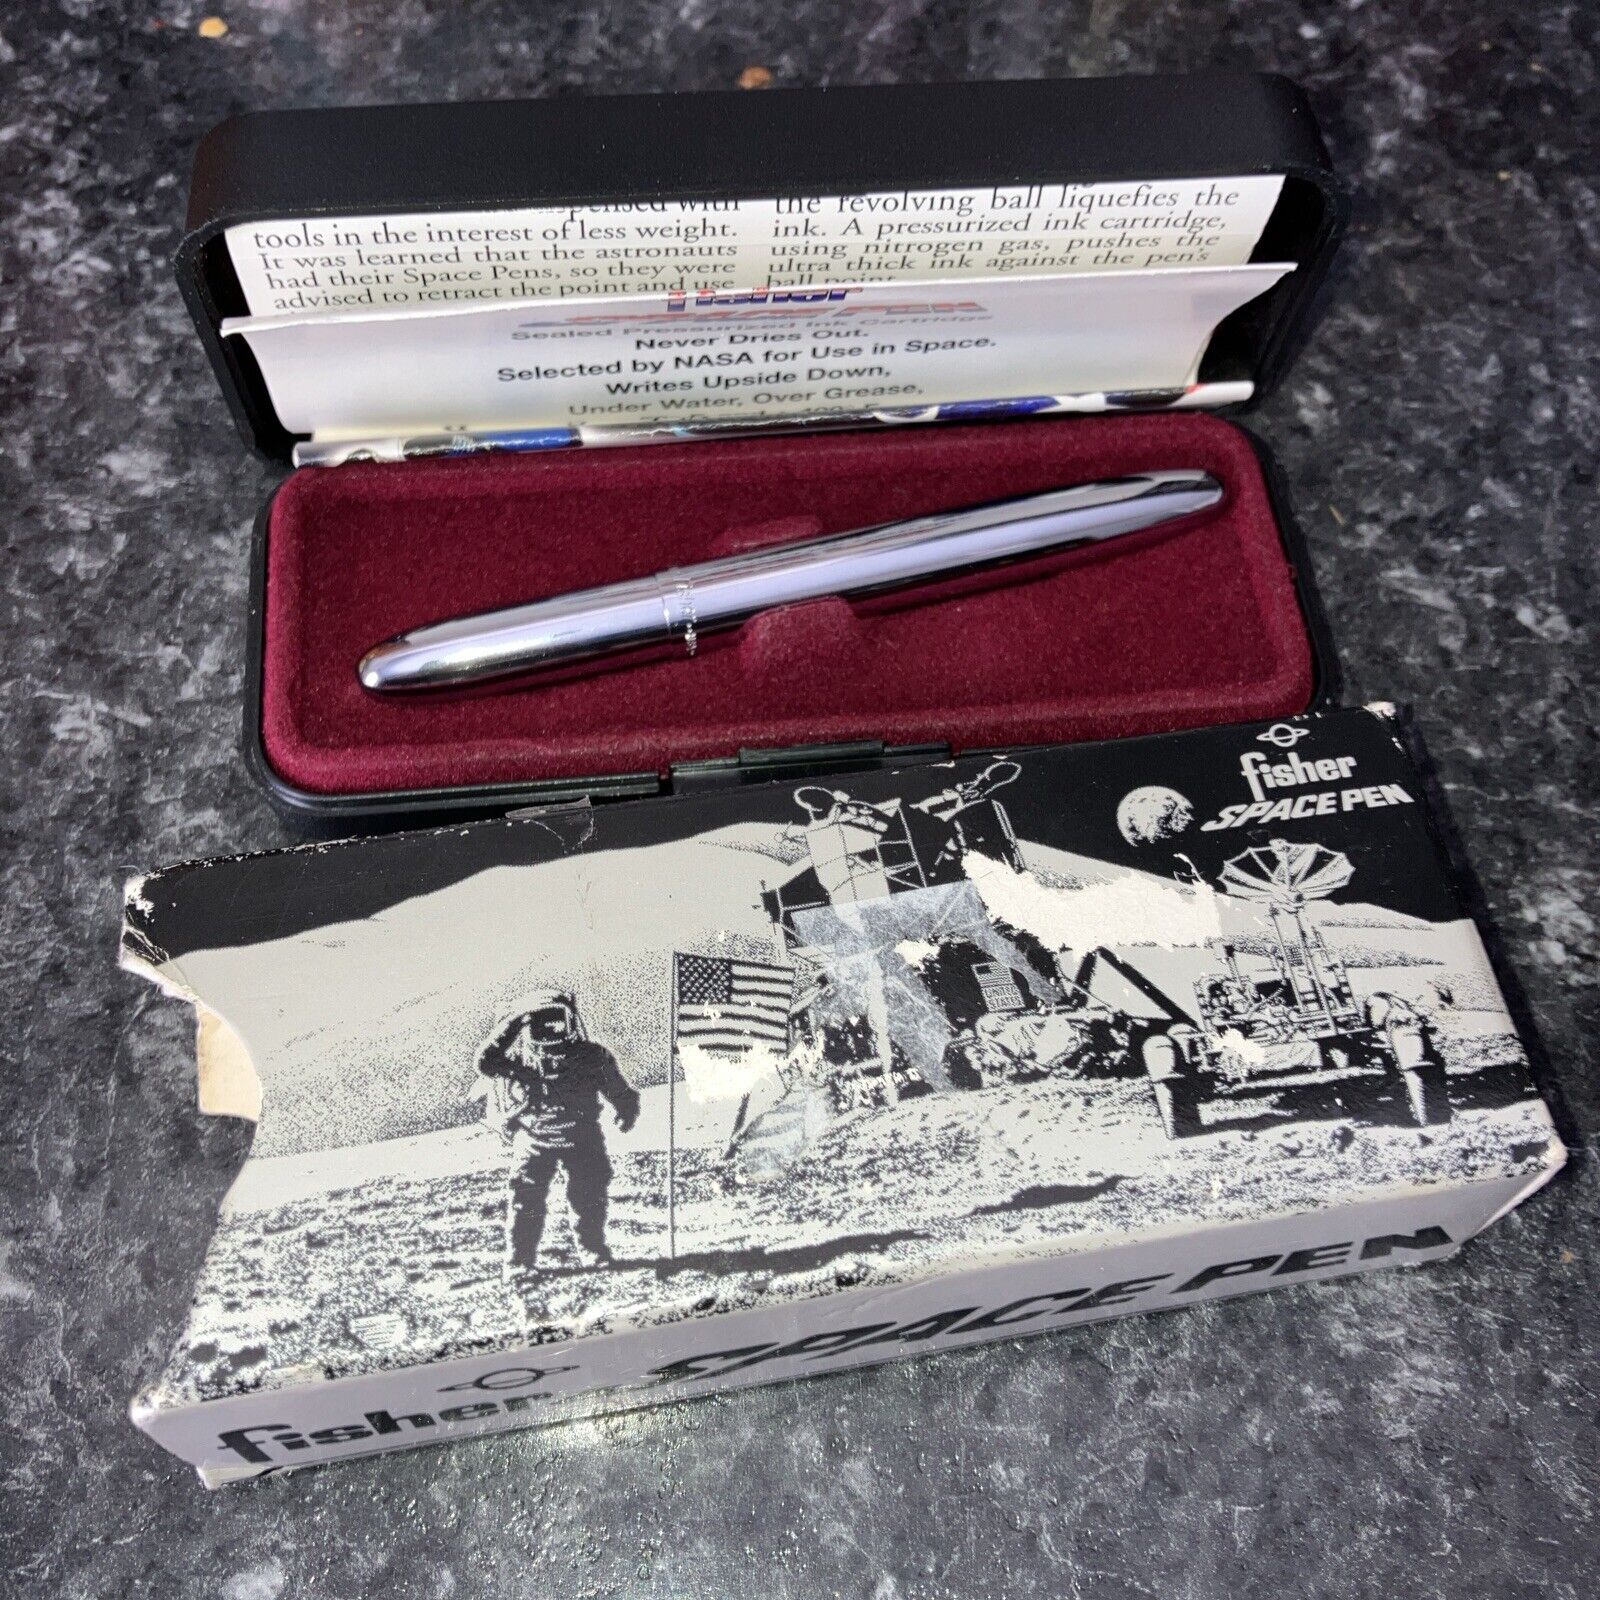 Vtg Fisher Space Pen Chrome Bullet With Original Box and Paperwork needs refill